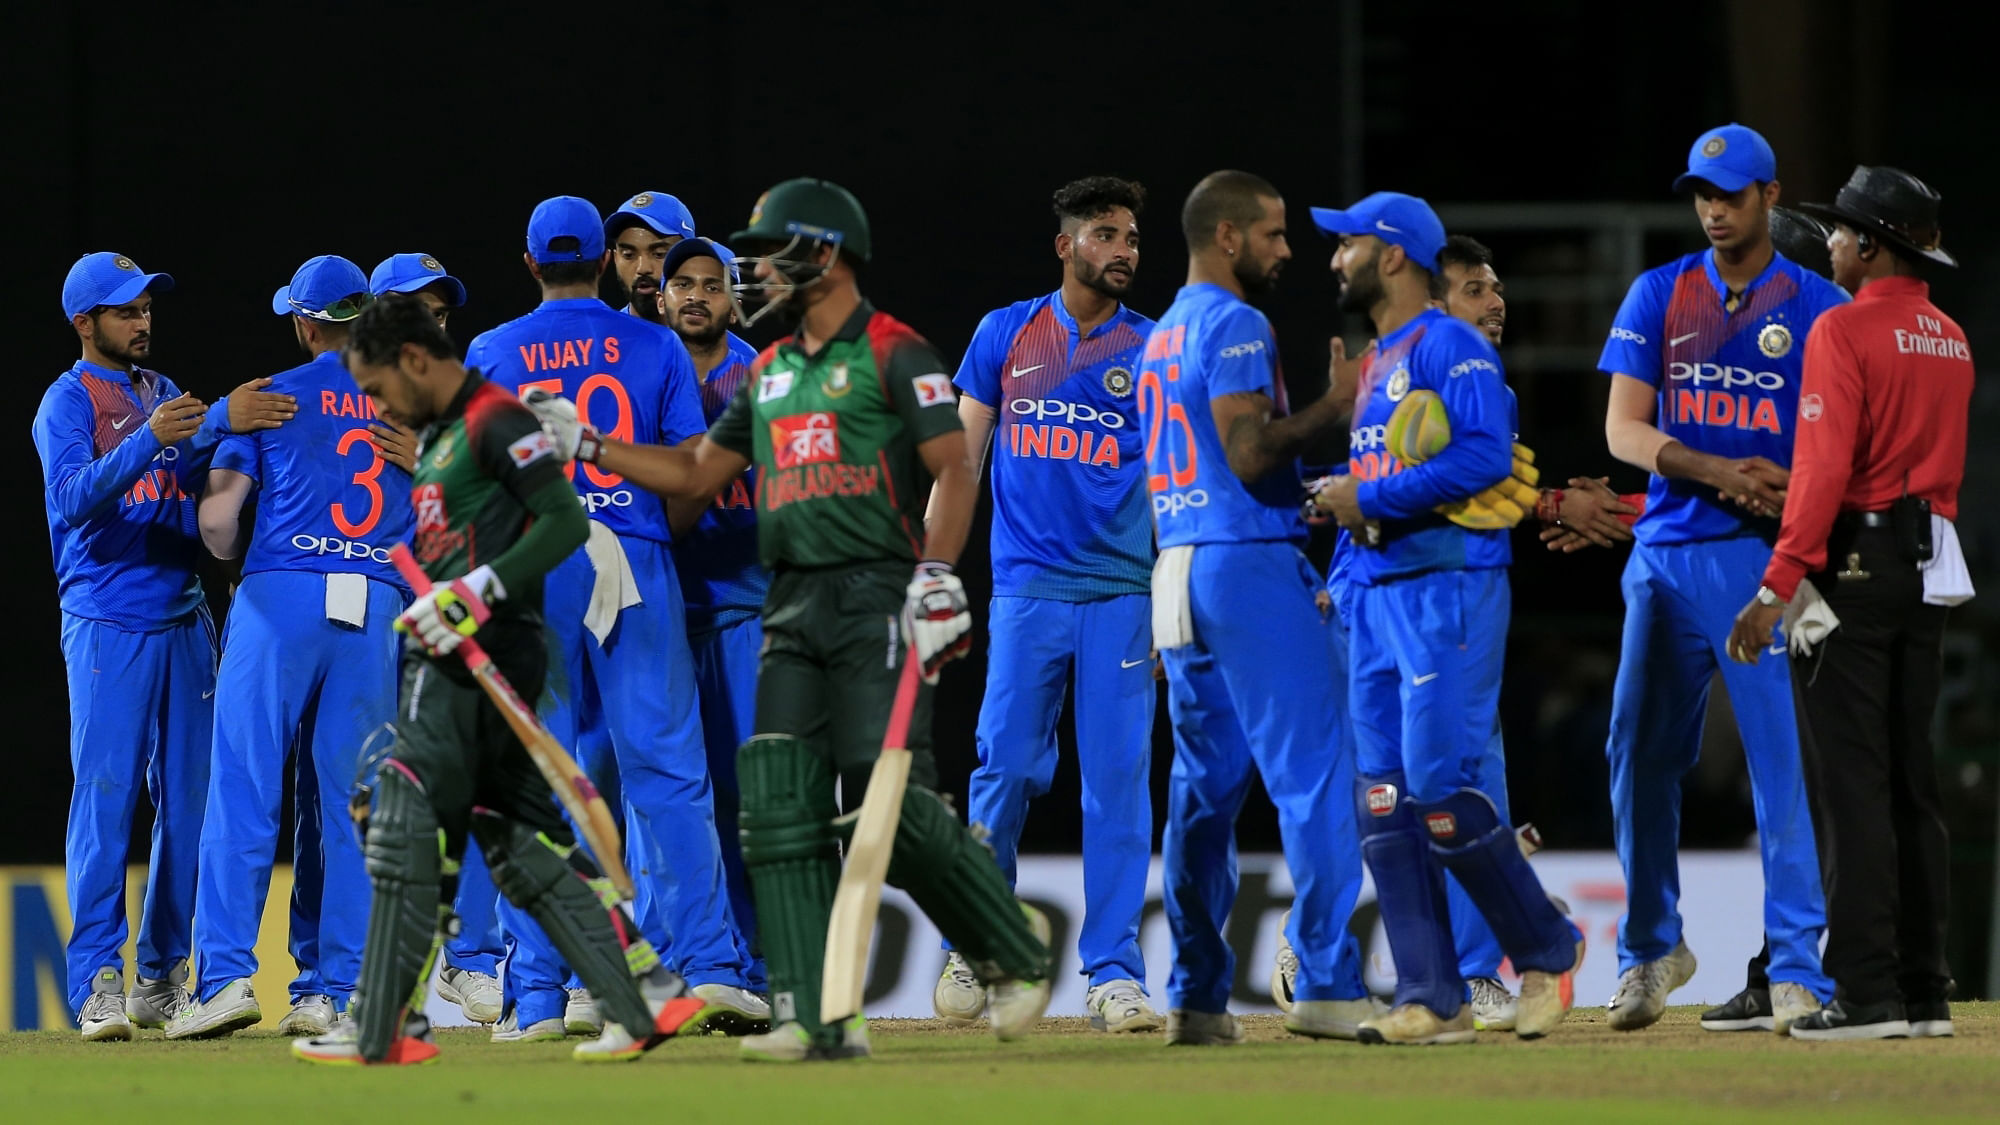 Players after the match following India’s 17-run win over Bangladesh.